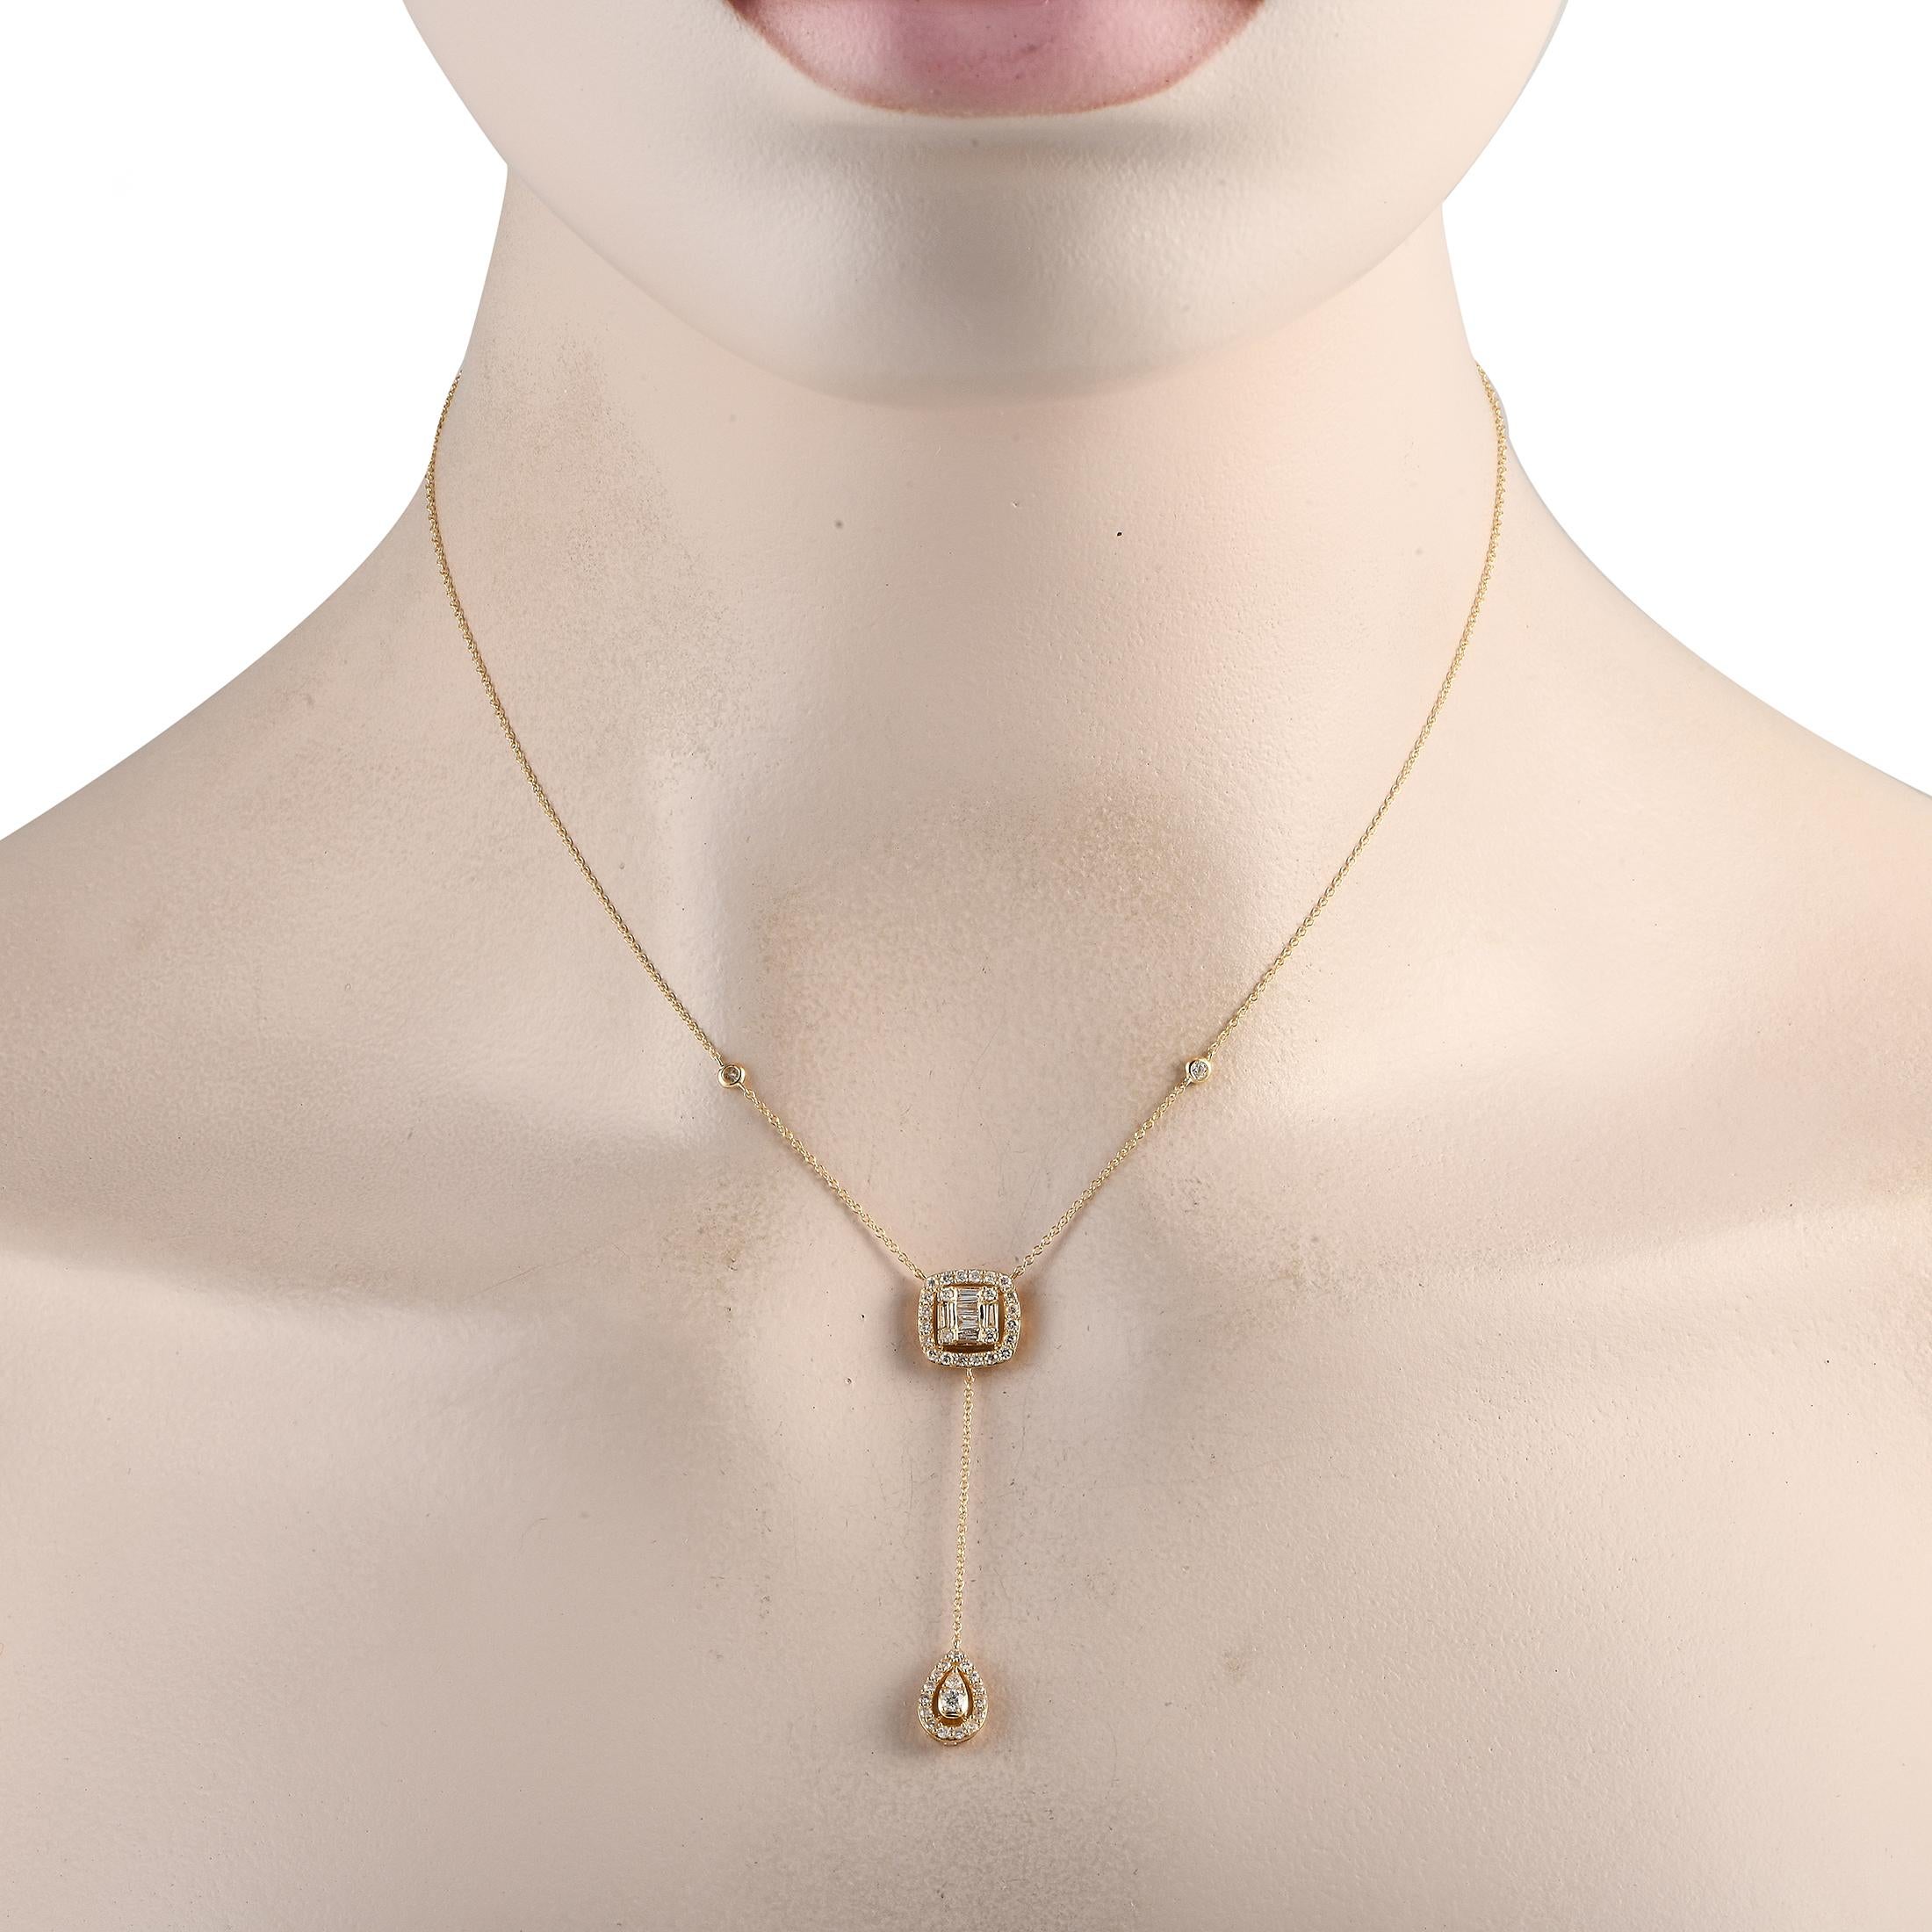 This sophisticated necklace will continually make a statement. Ideal for any occasion, its crafted from 14K Yellow Gold and features a 2 dangling pendant at the center of a 15 chain. Diamonds with a total weight of 075 carats provide the perfect